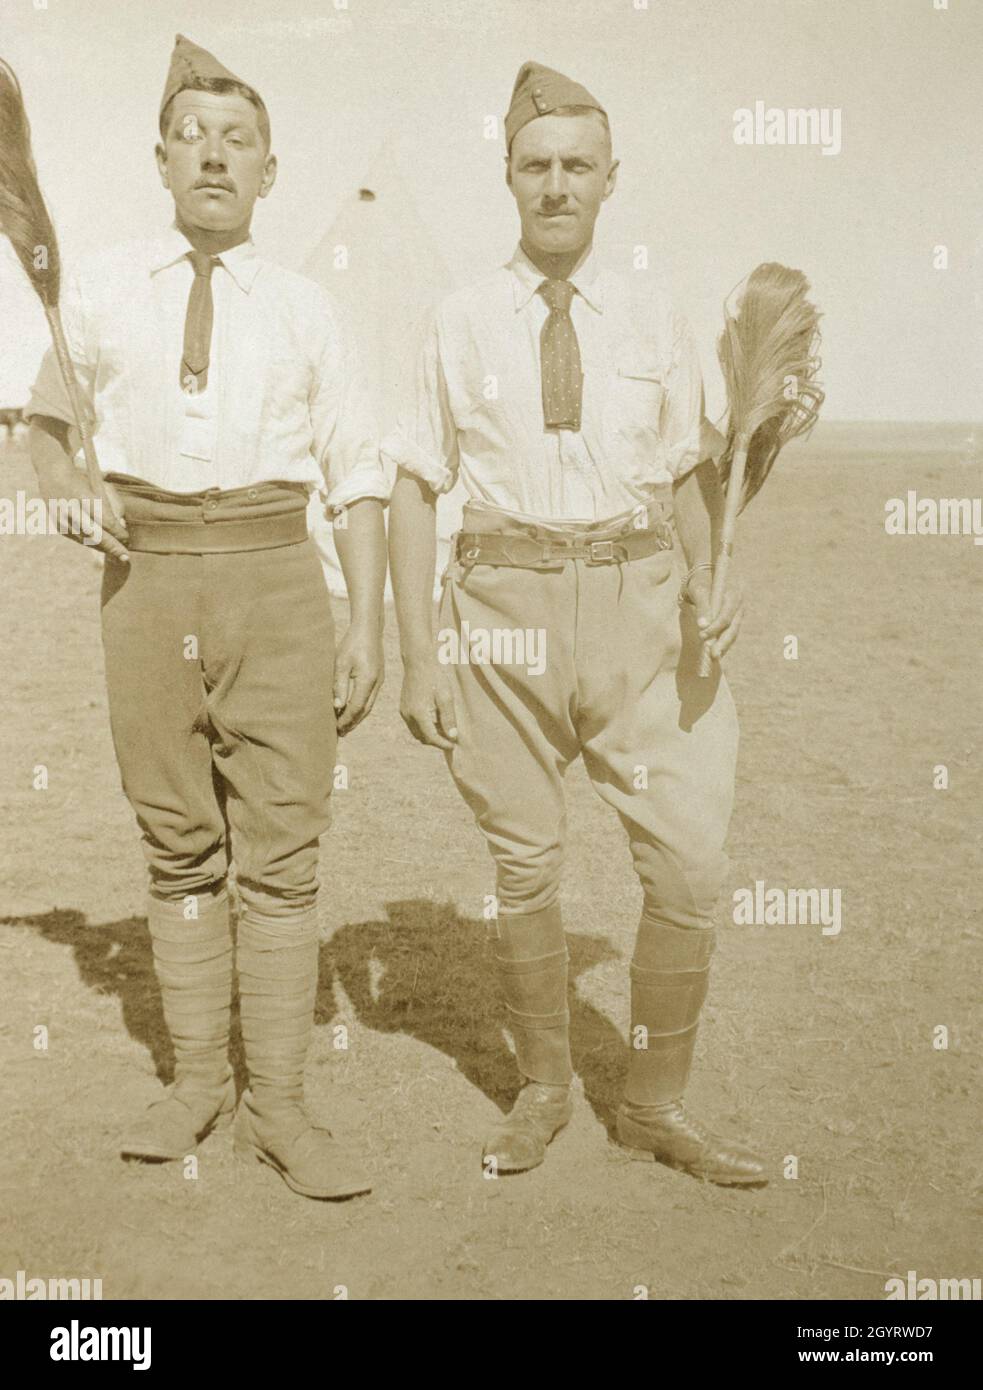 Two First World War era Britsh army officers wearing side caps and holding fly swats. A bell tent can be seen behind them. Stock Photo